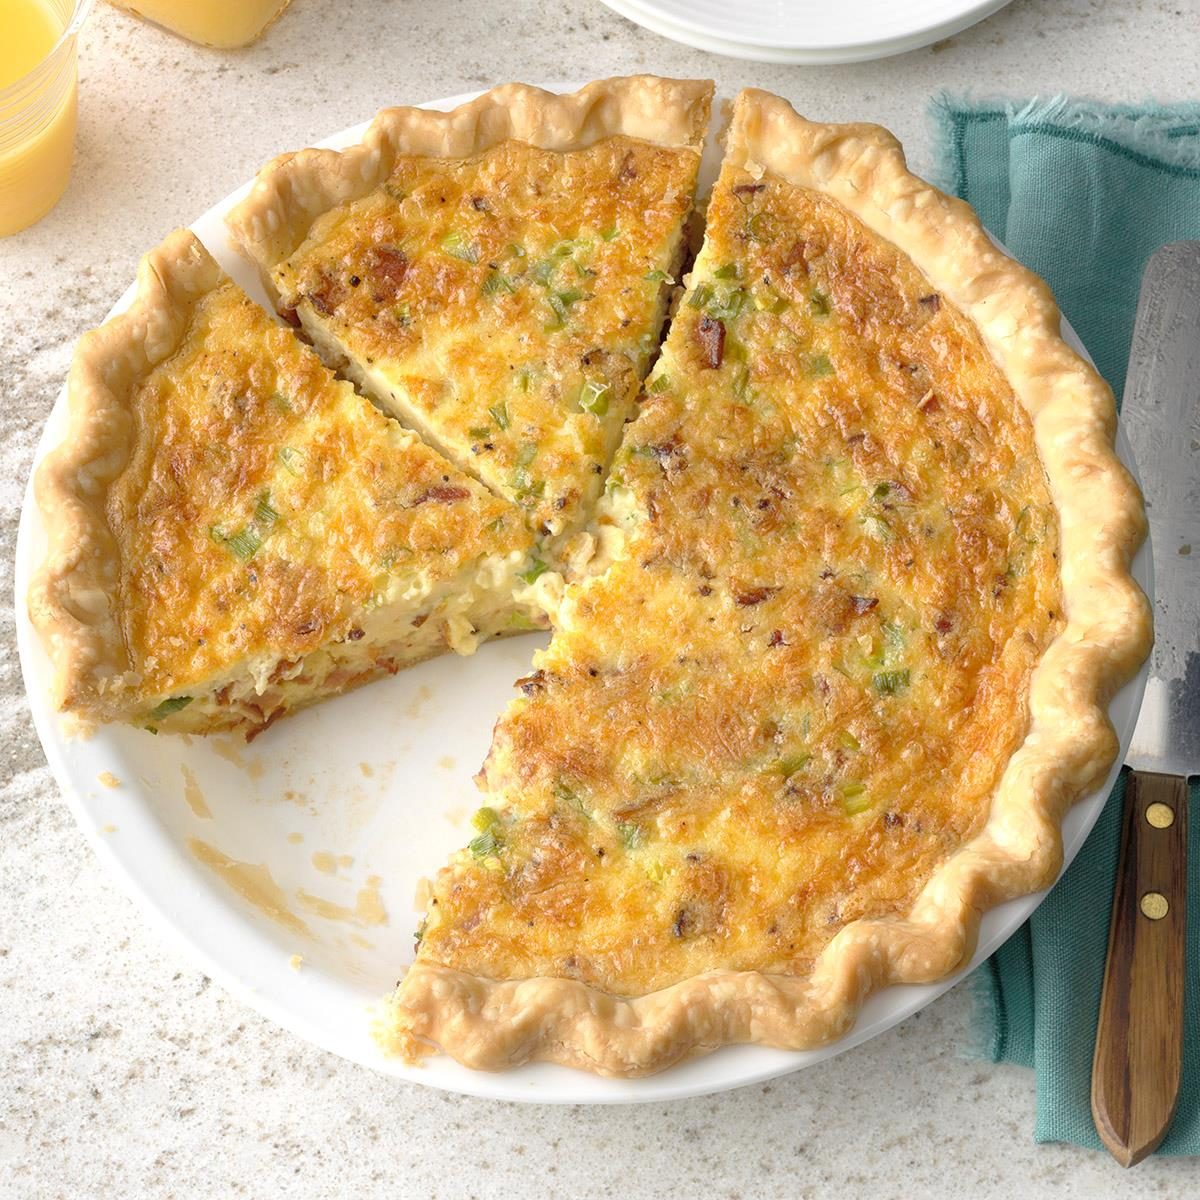 Bacon and Cheese Quiche Recipe: How to Make It